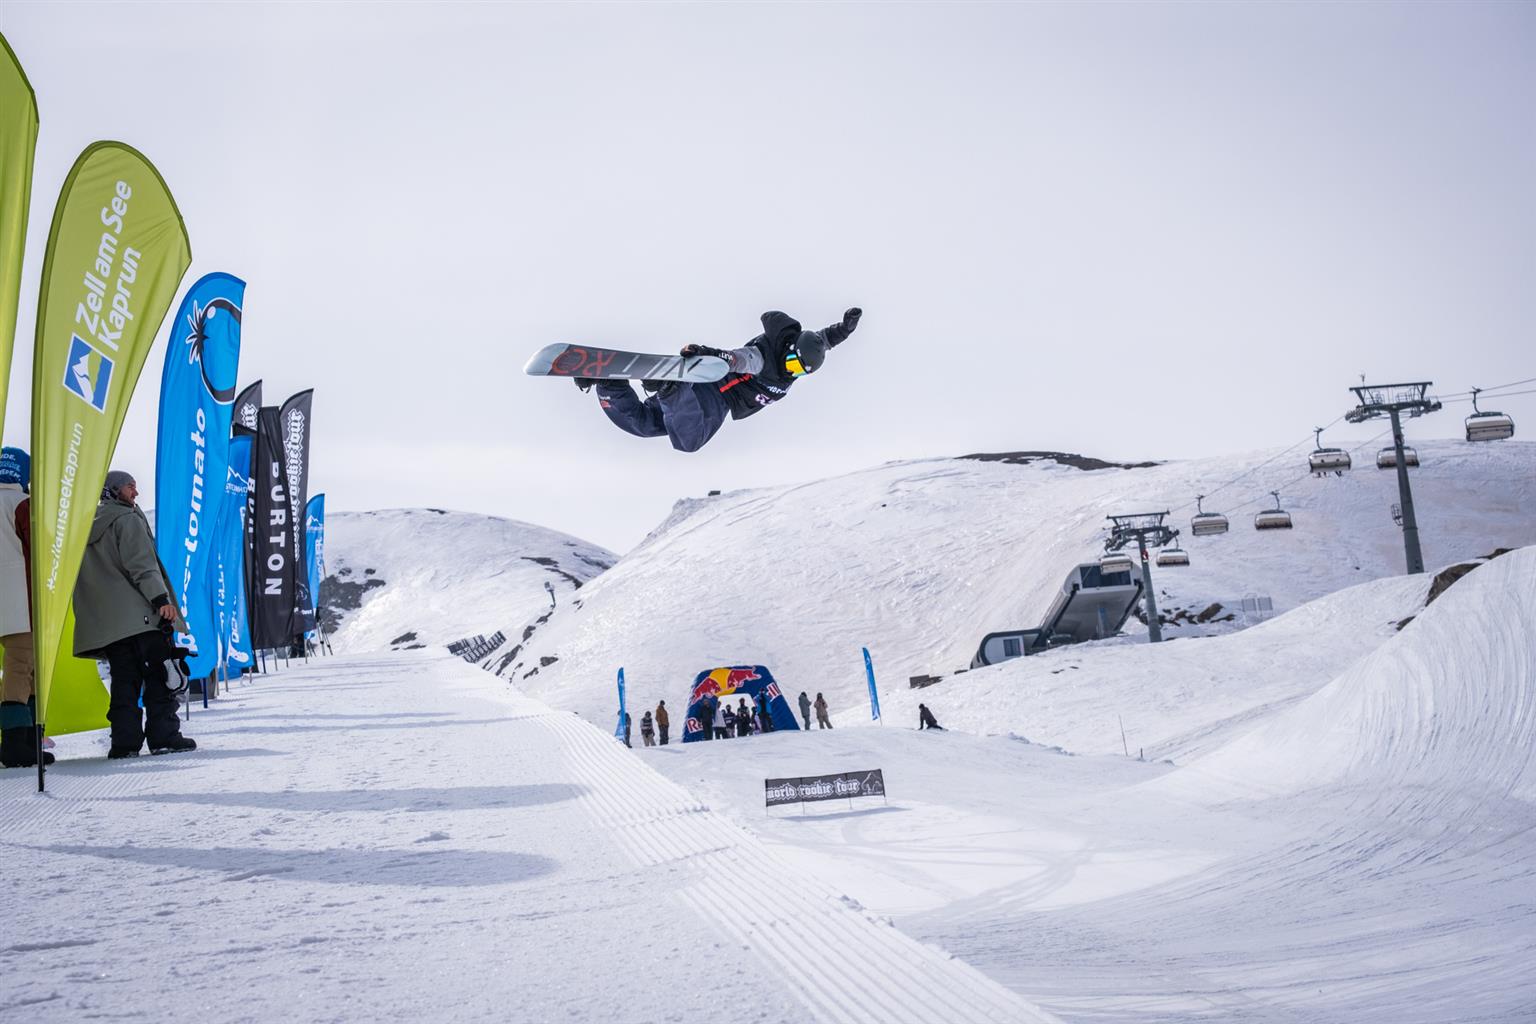 Boardriding News 2023 World Rookie Snowboard Finals who will be the next stars?